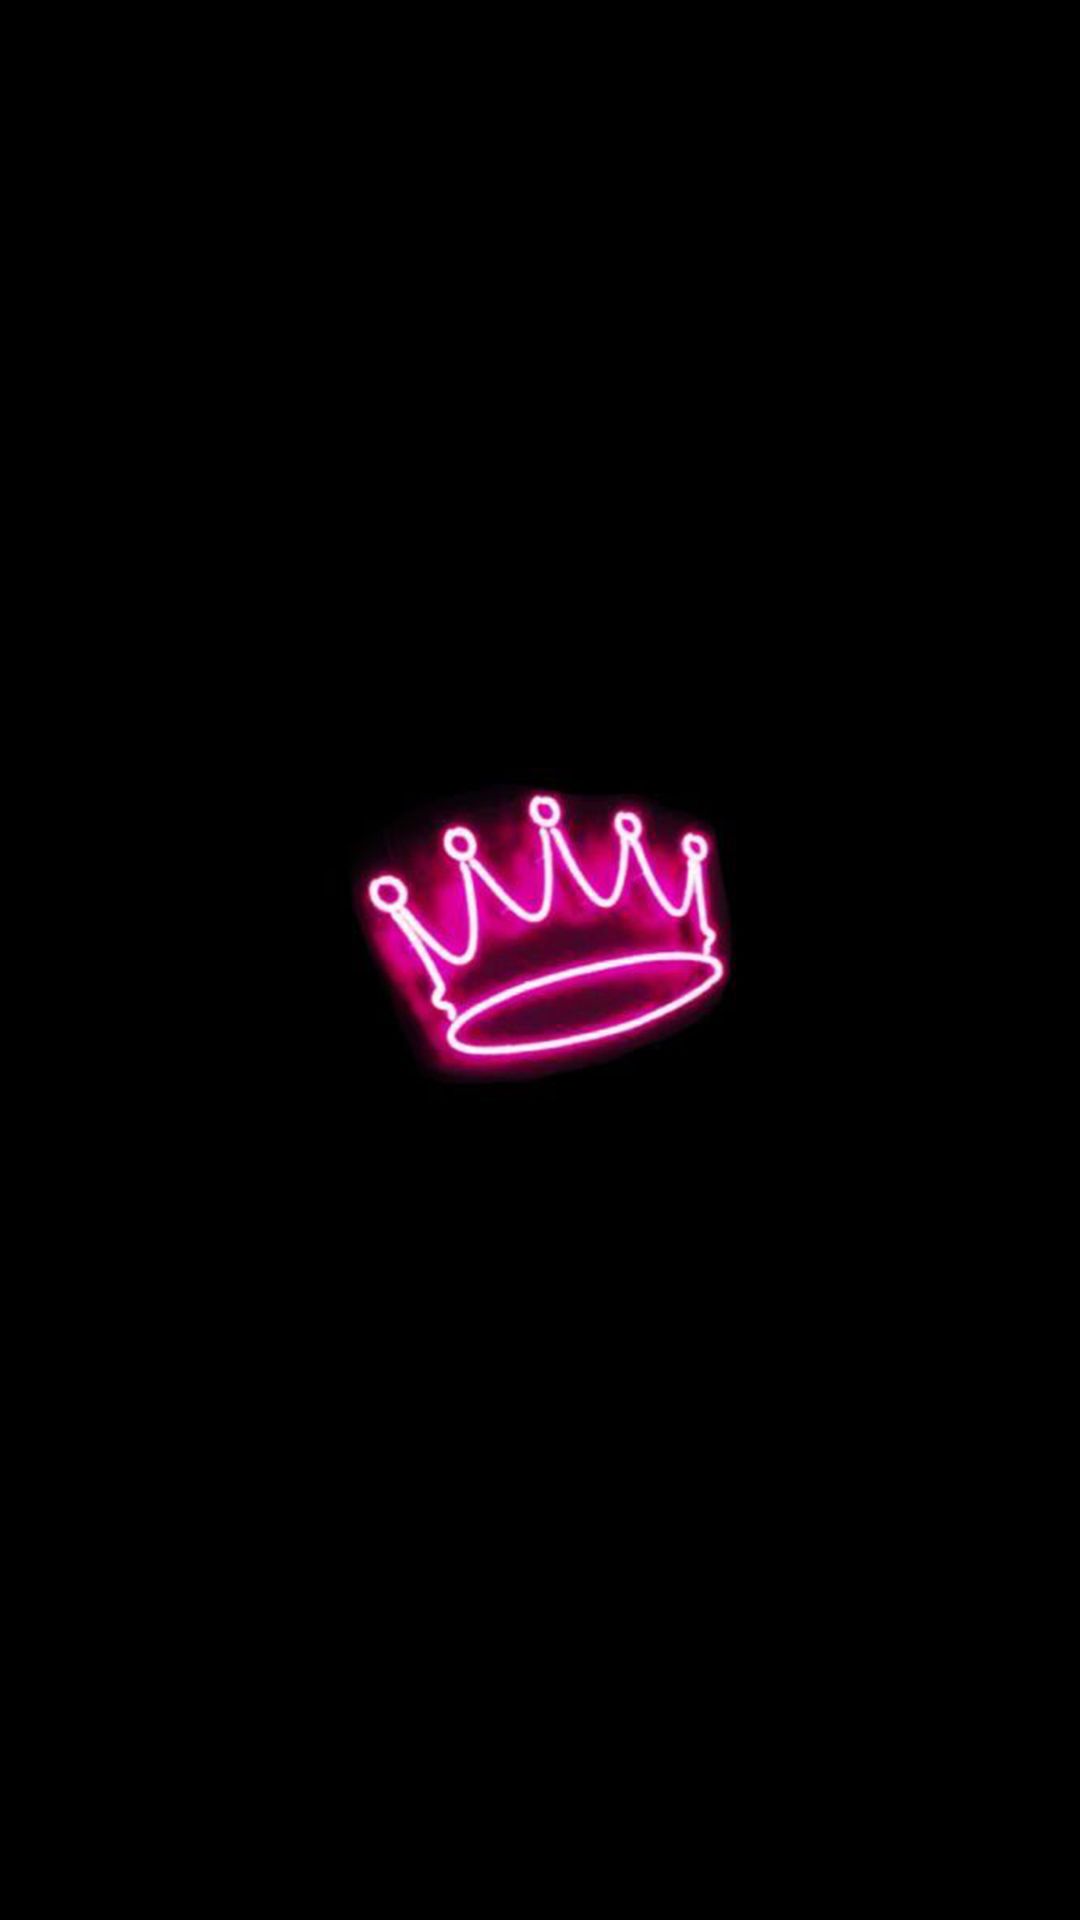 A neon crown on black background - Hot pink